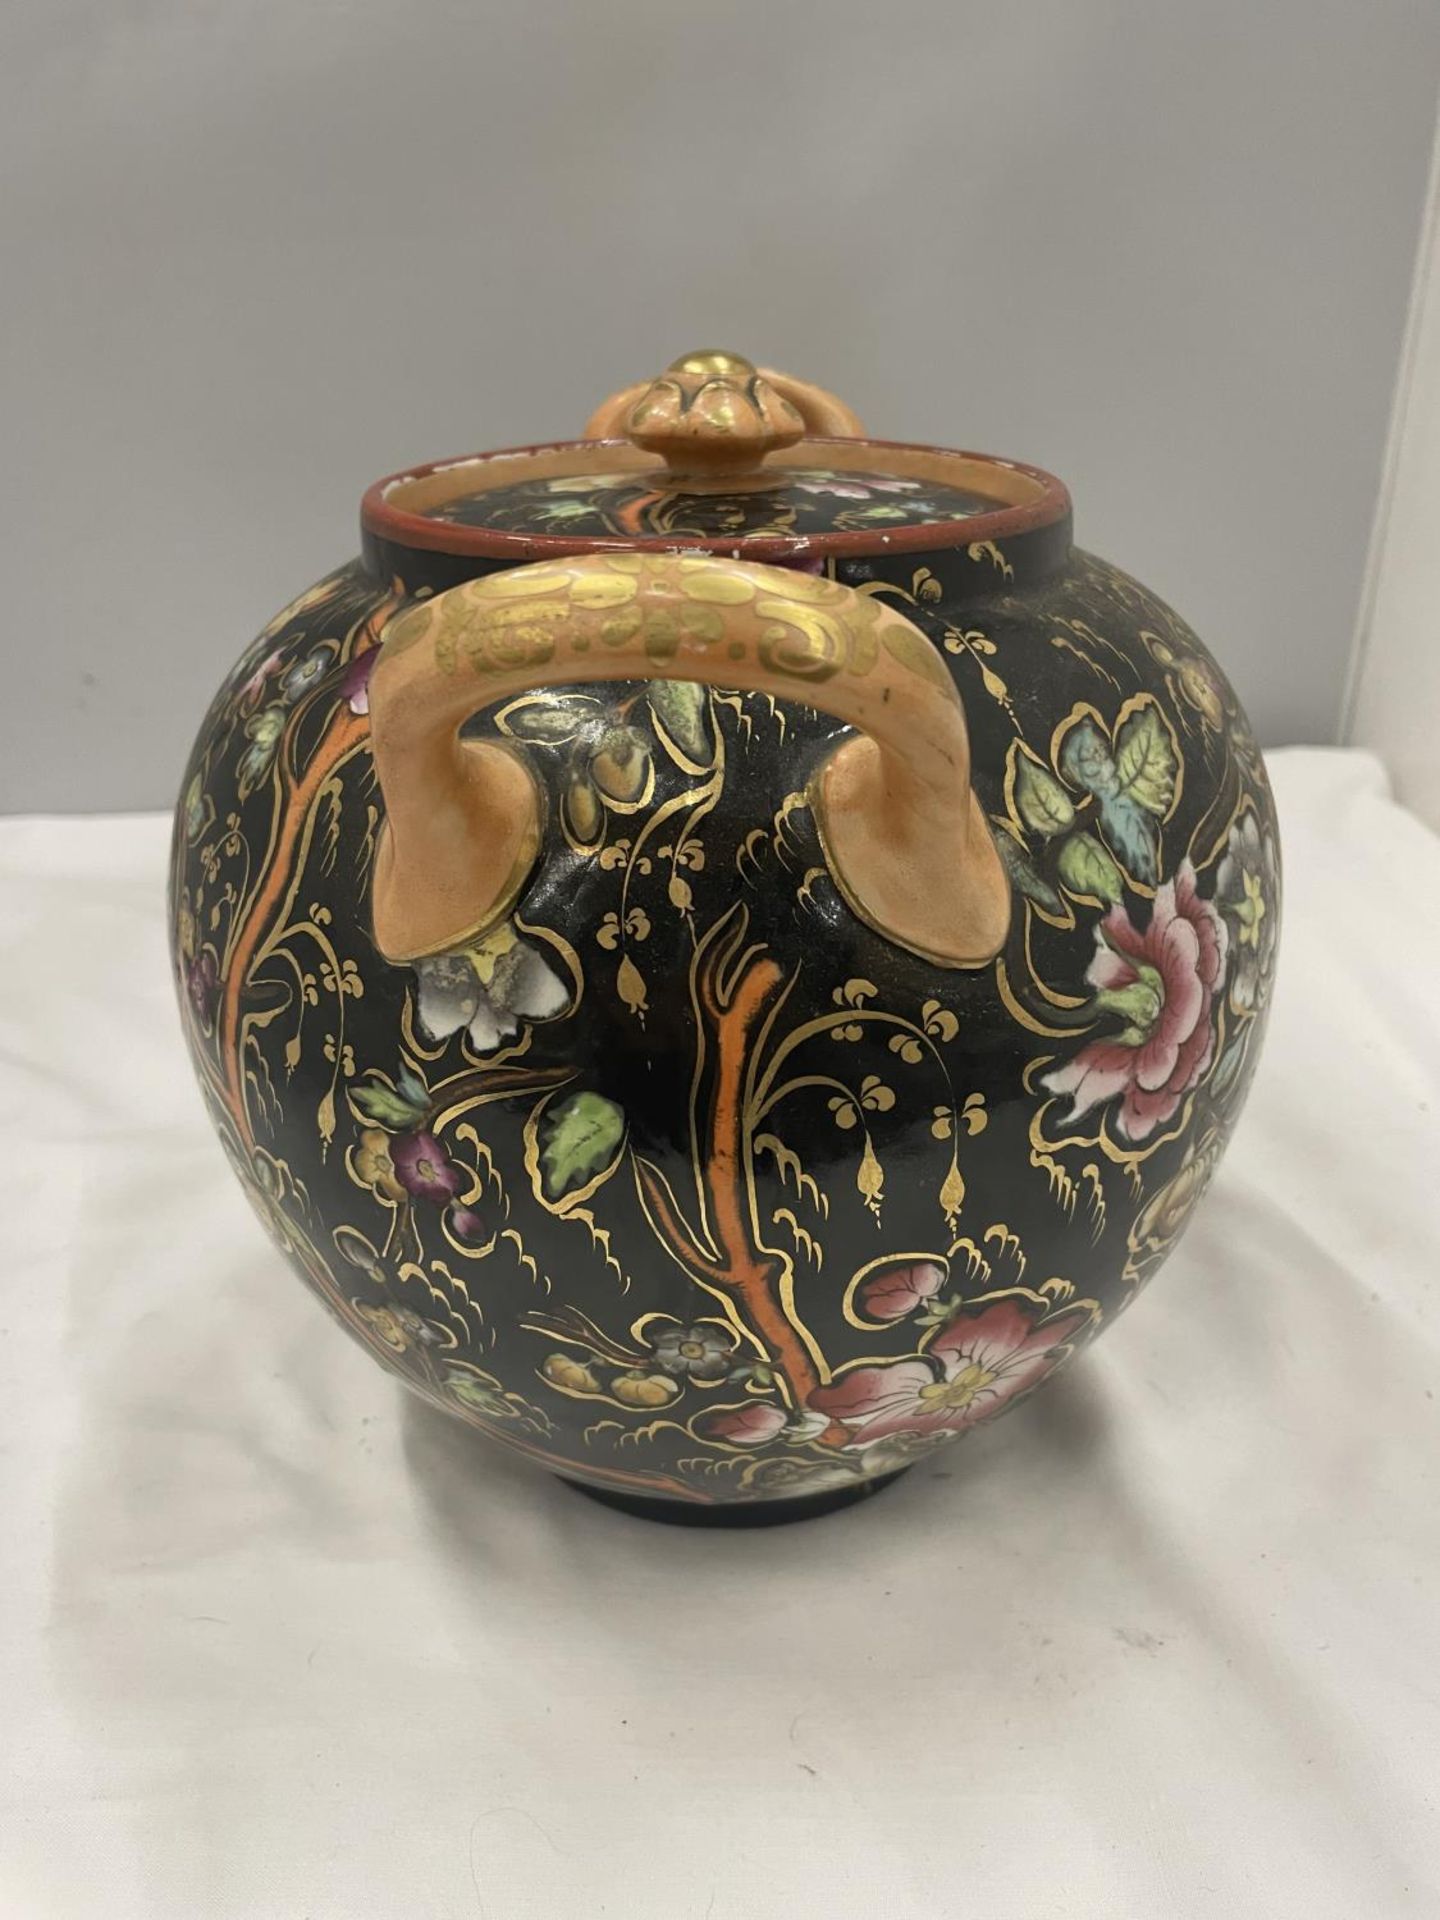 A VINTAGE LARGE TWIN HANDLED LIDDED POT WITH FLORAL DESIGN HEIGHT 22CM - Image 2 of 6